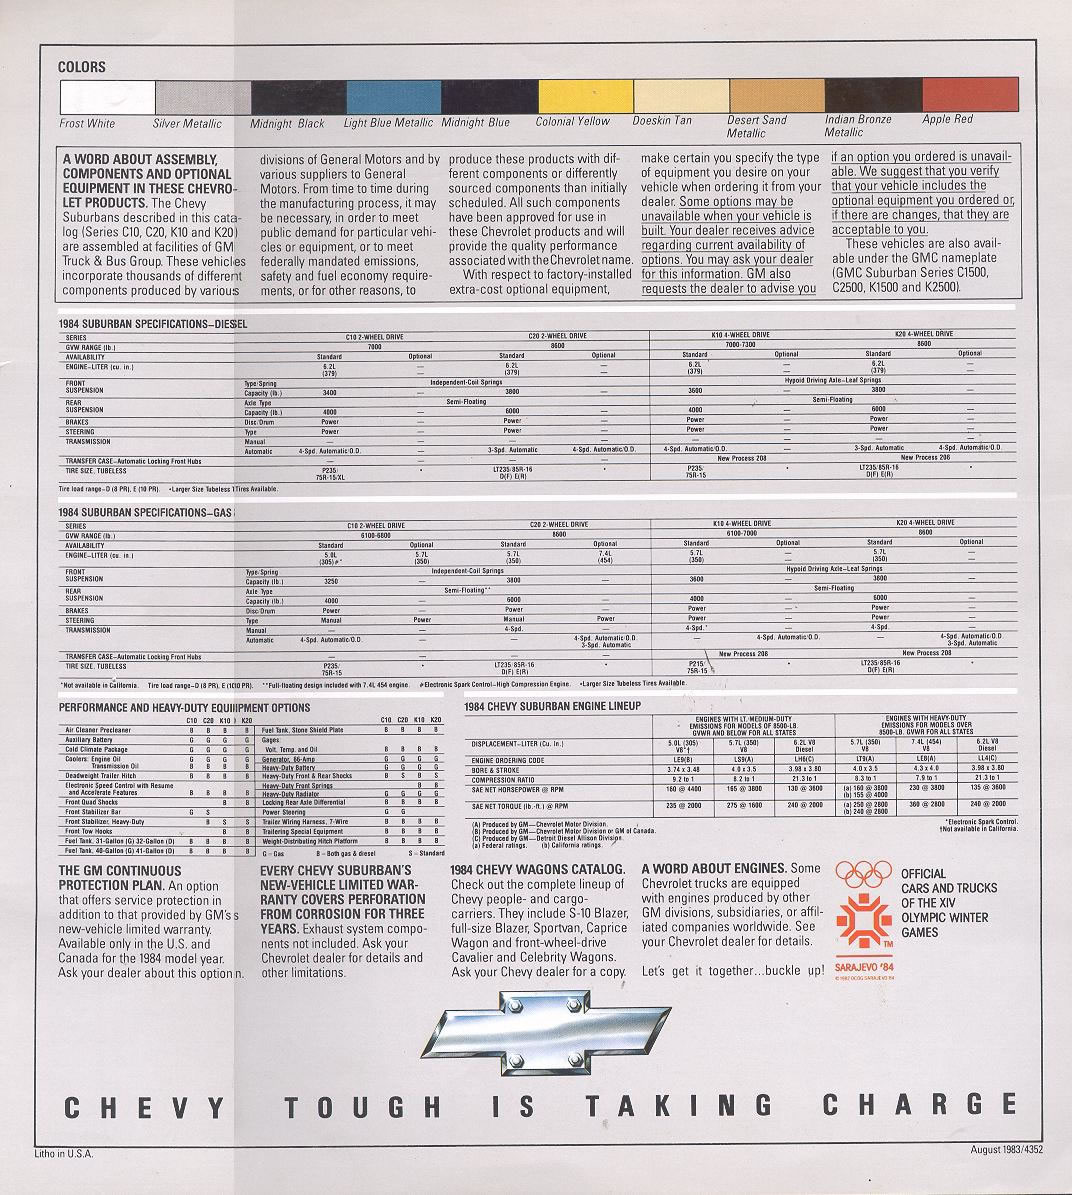 Exterior Paint Colors and Paint Codes Used on the Suburban